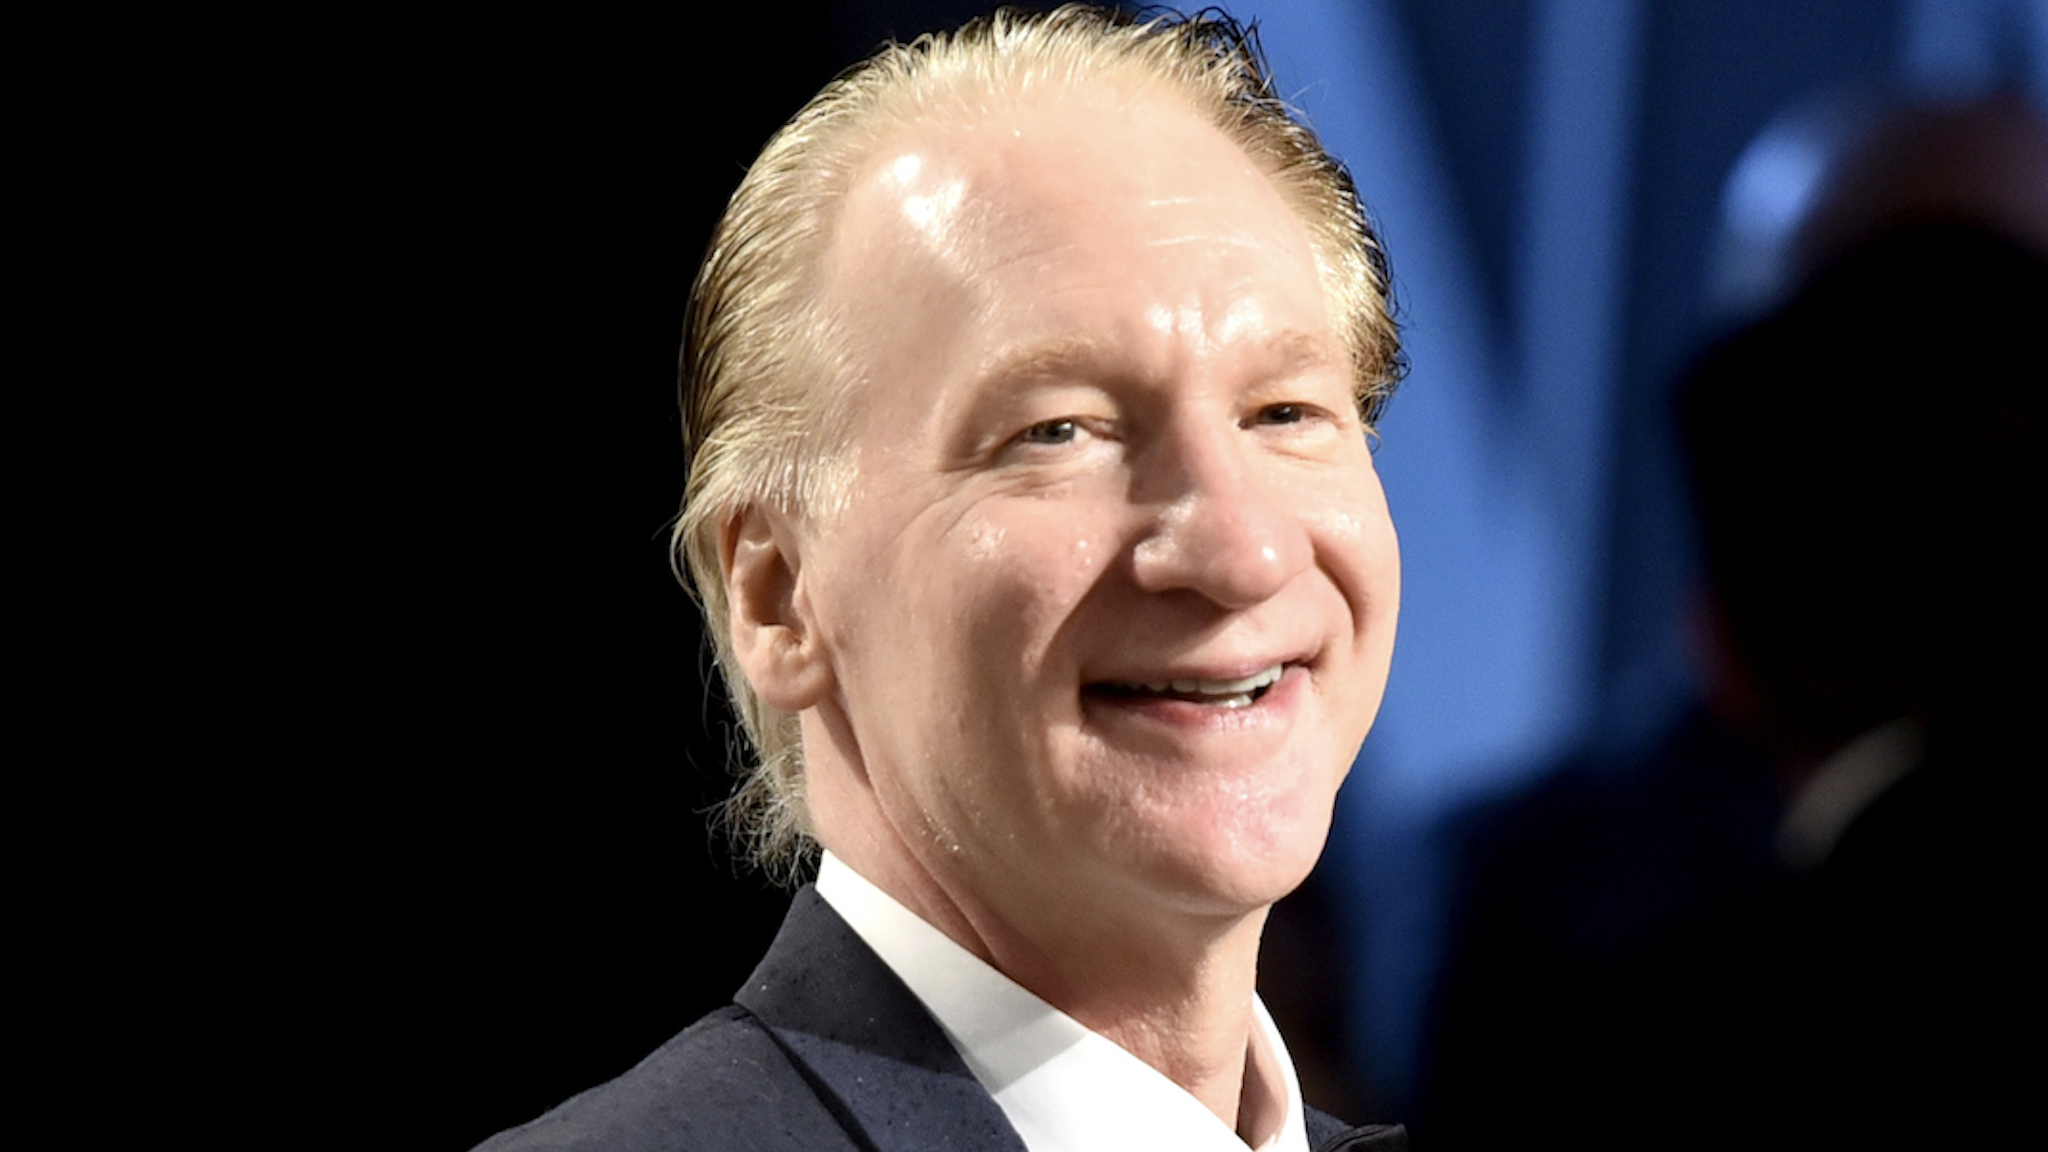 'Real Time' host Bill Maher says "presentism," where historical figures are held to modern-day woke values, is ridiculous.